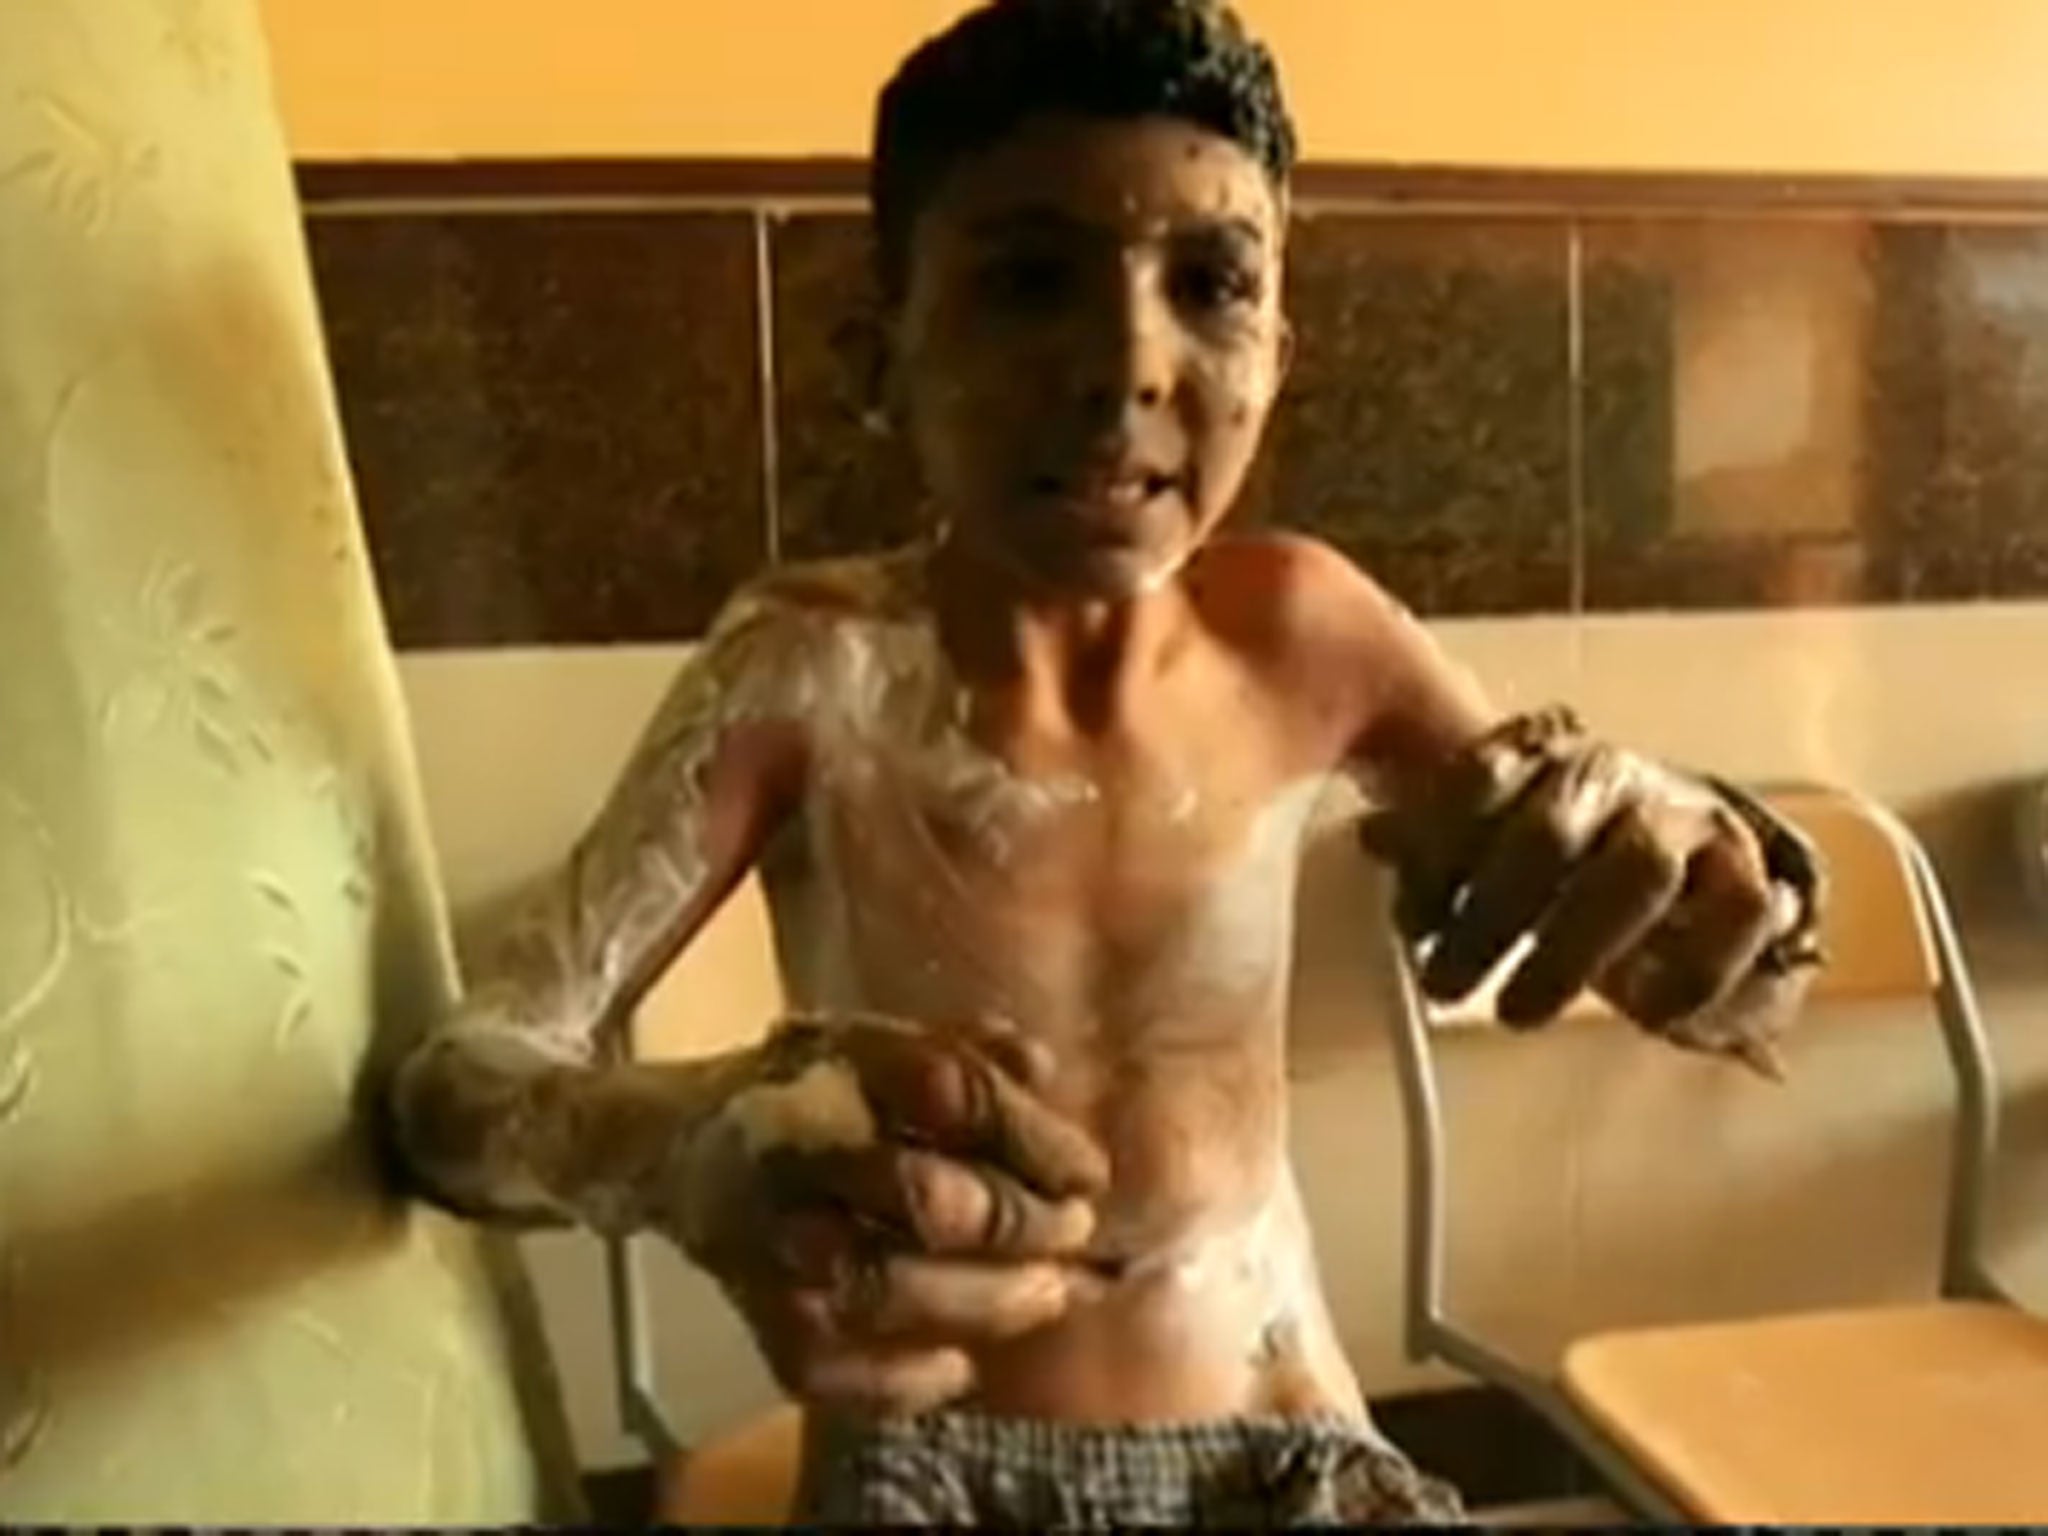 WARNING: GRAPHIC IMAGES BBC Panorama has released footage of an apparent incendiary bombing of a playground in Aleppo, northern Syria, with 15-year-old Ahmed (pictured) among those injured